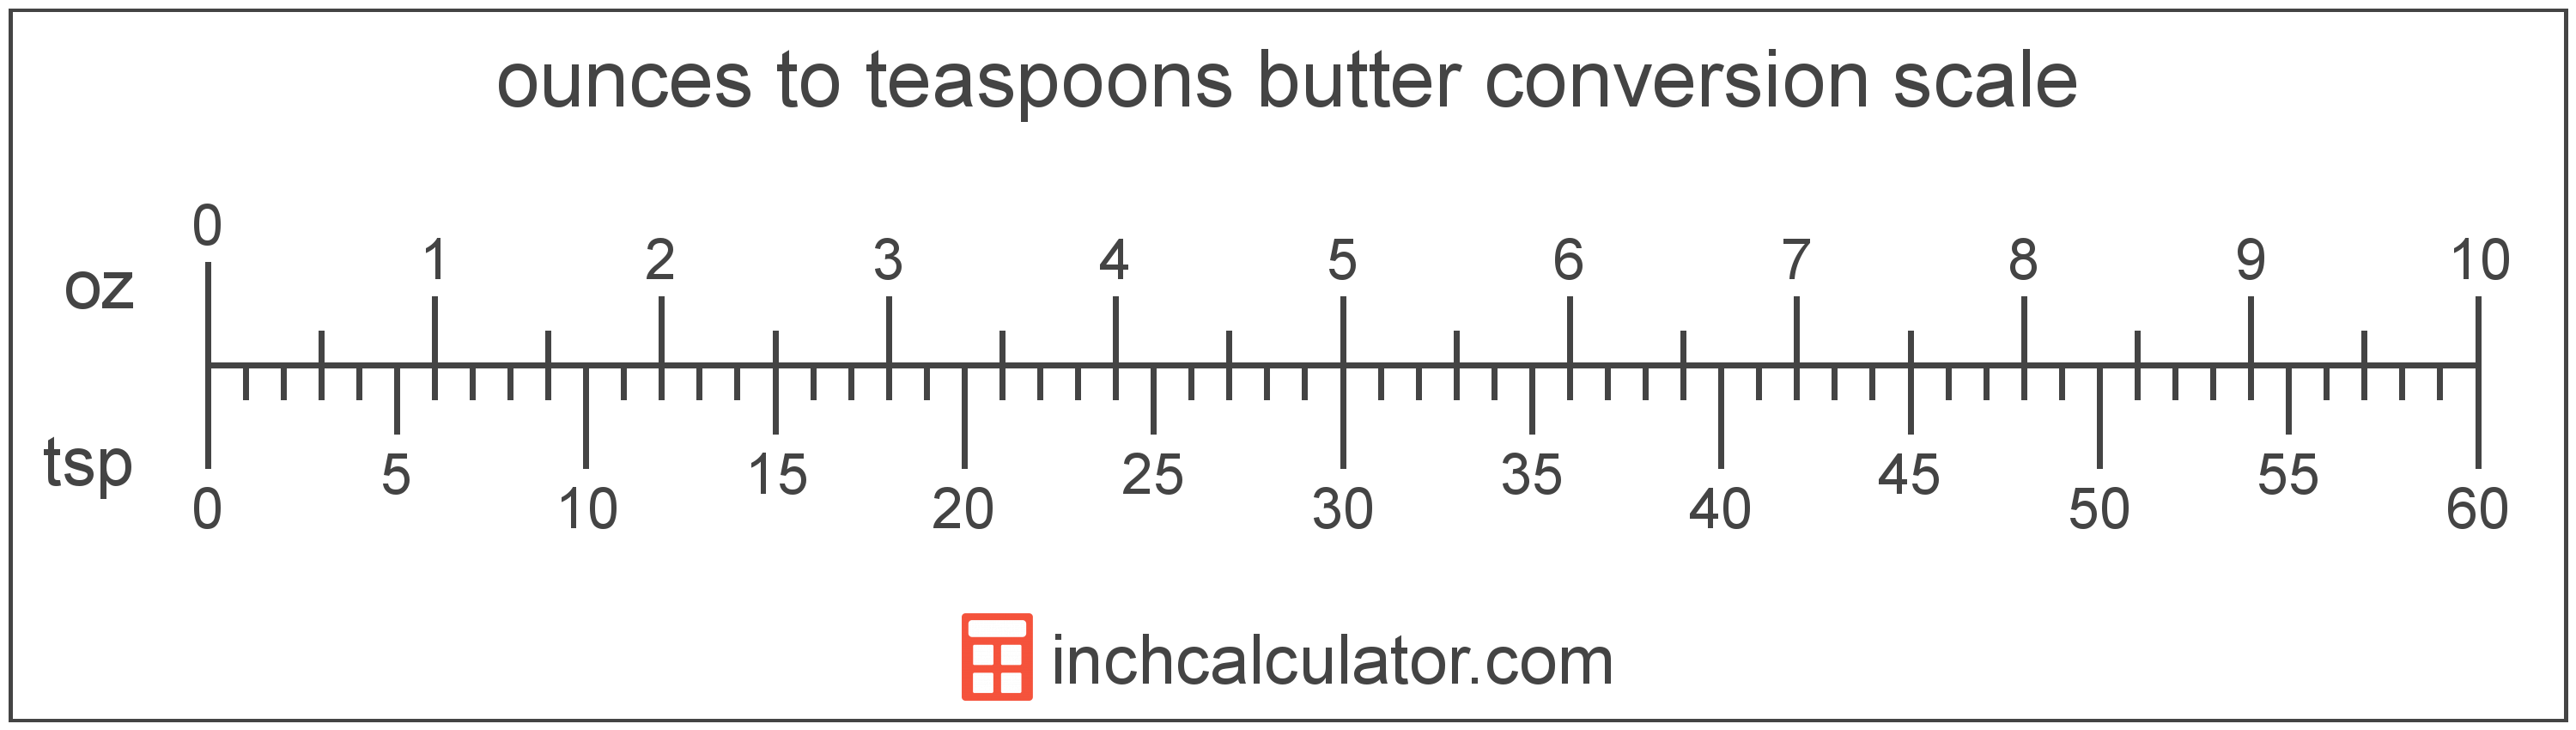 teaspoons-of-butter-to-ounces-conversion-tsp-to-oz